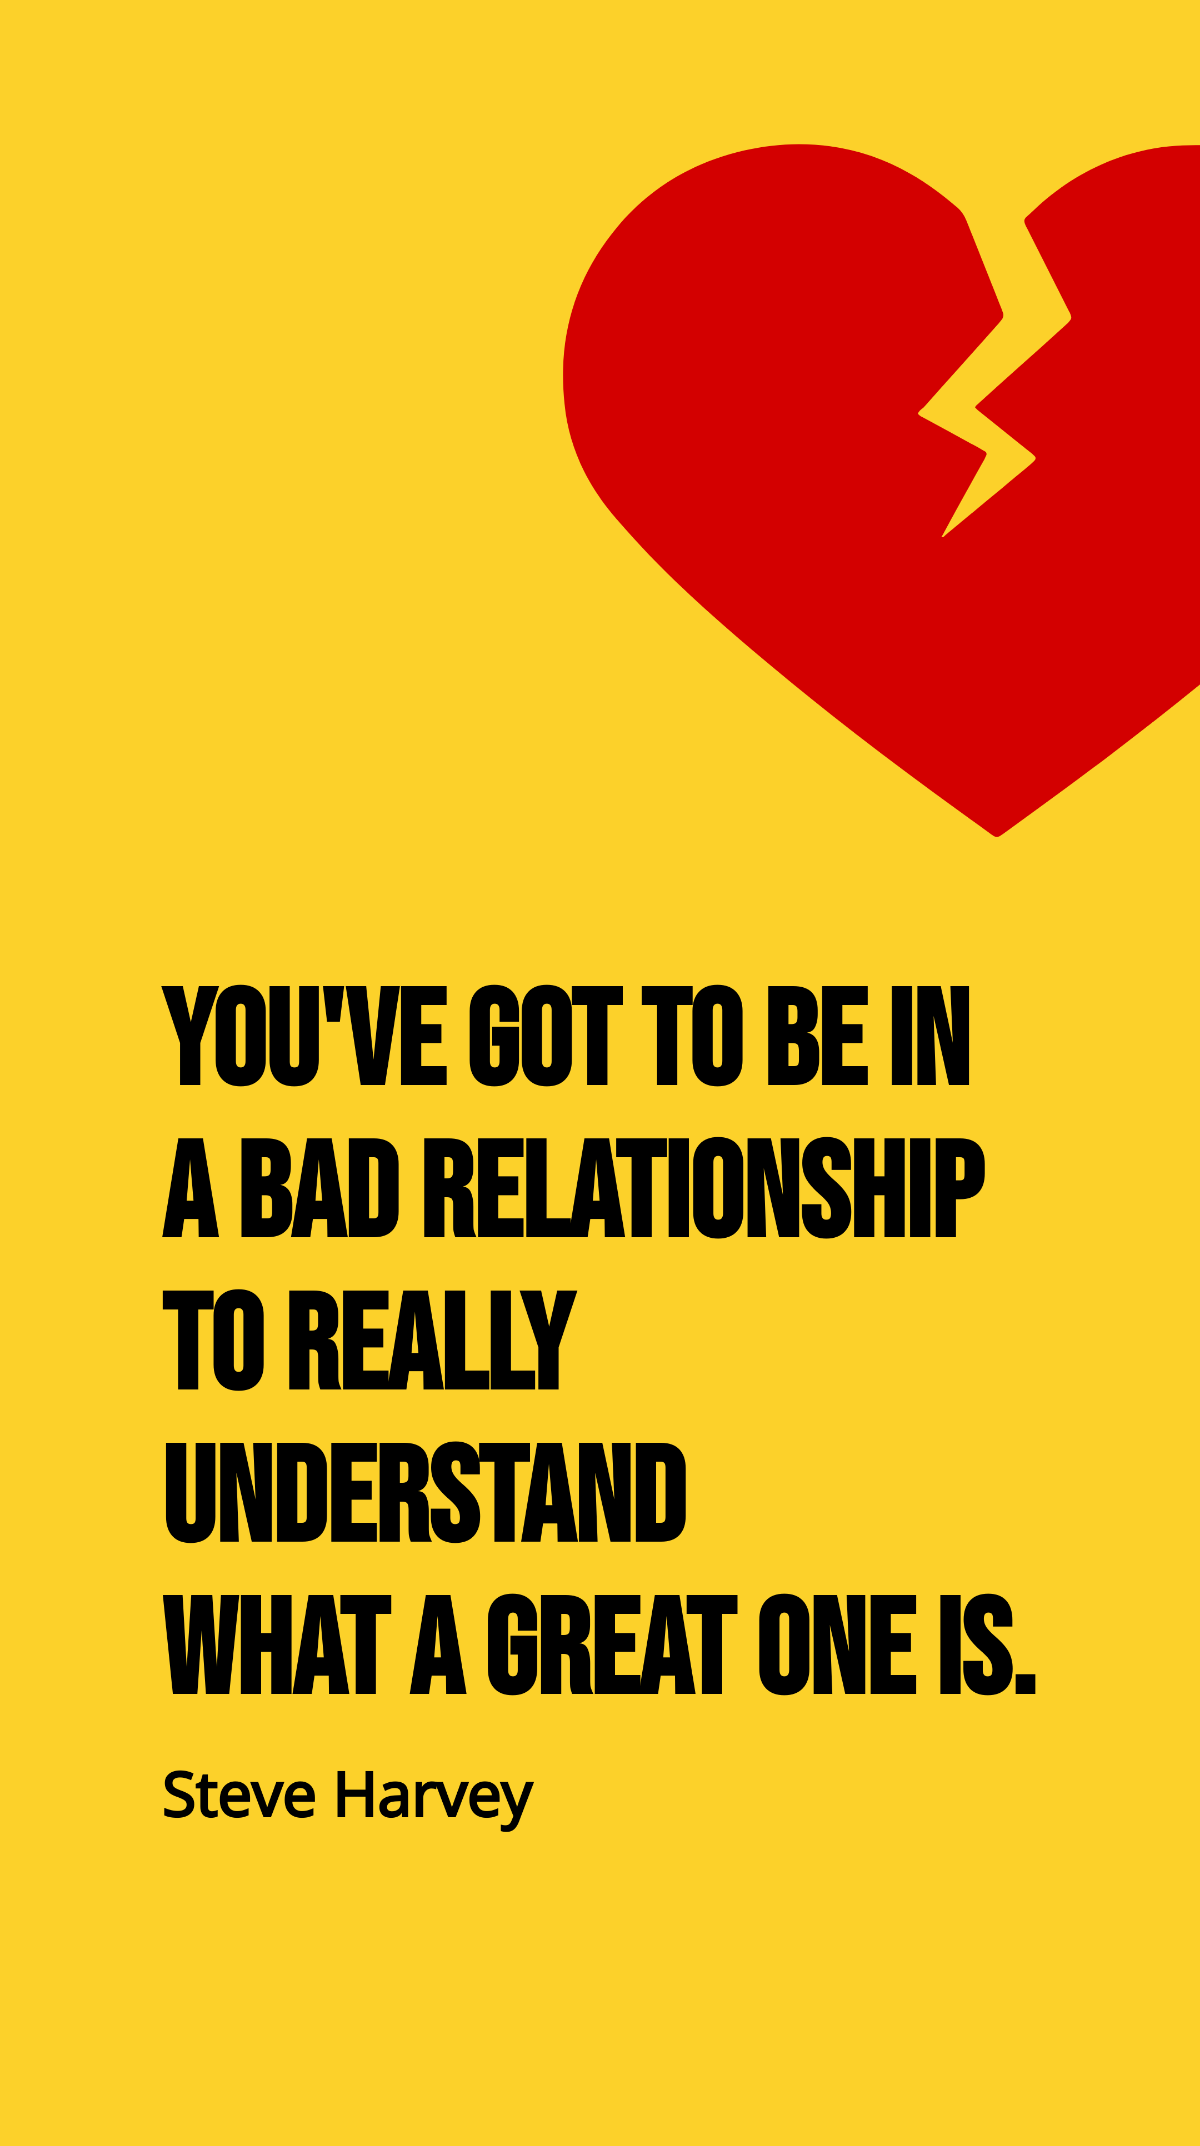 Steve Harvey - You've got to be in a bad relationship to really understand what a great one is. Template